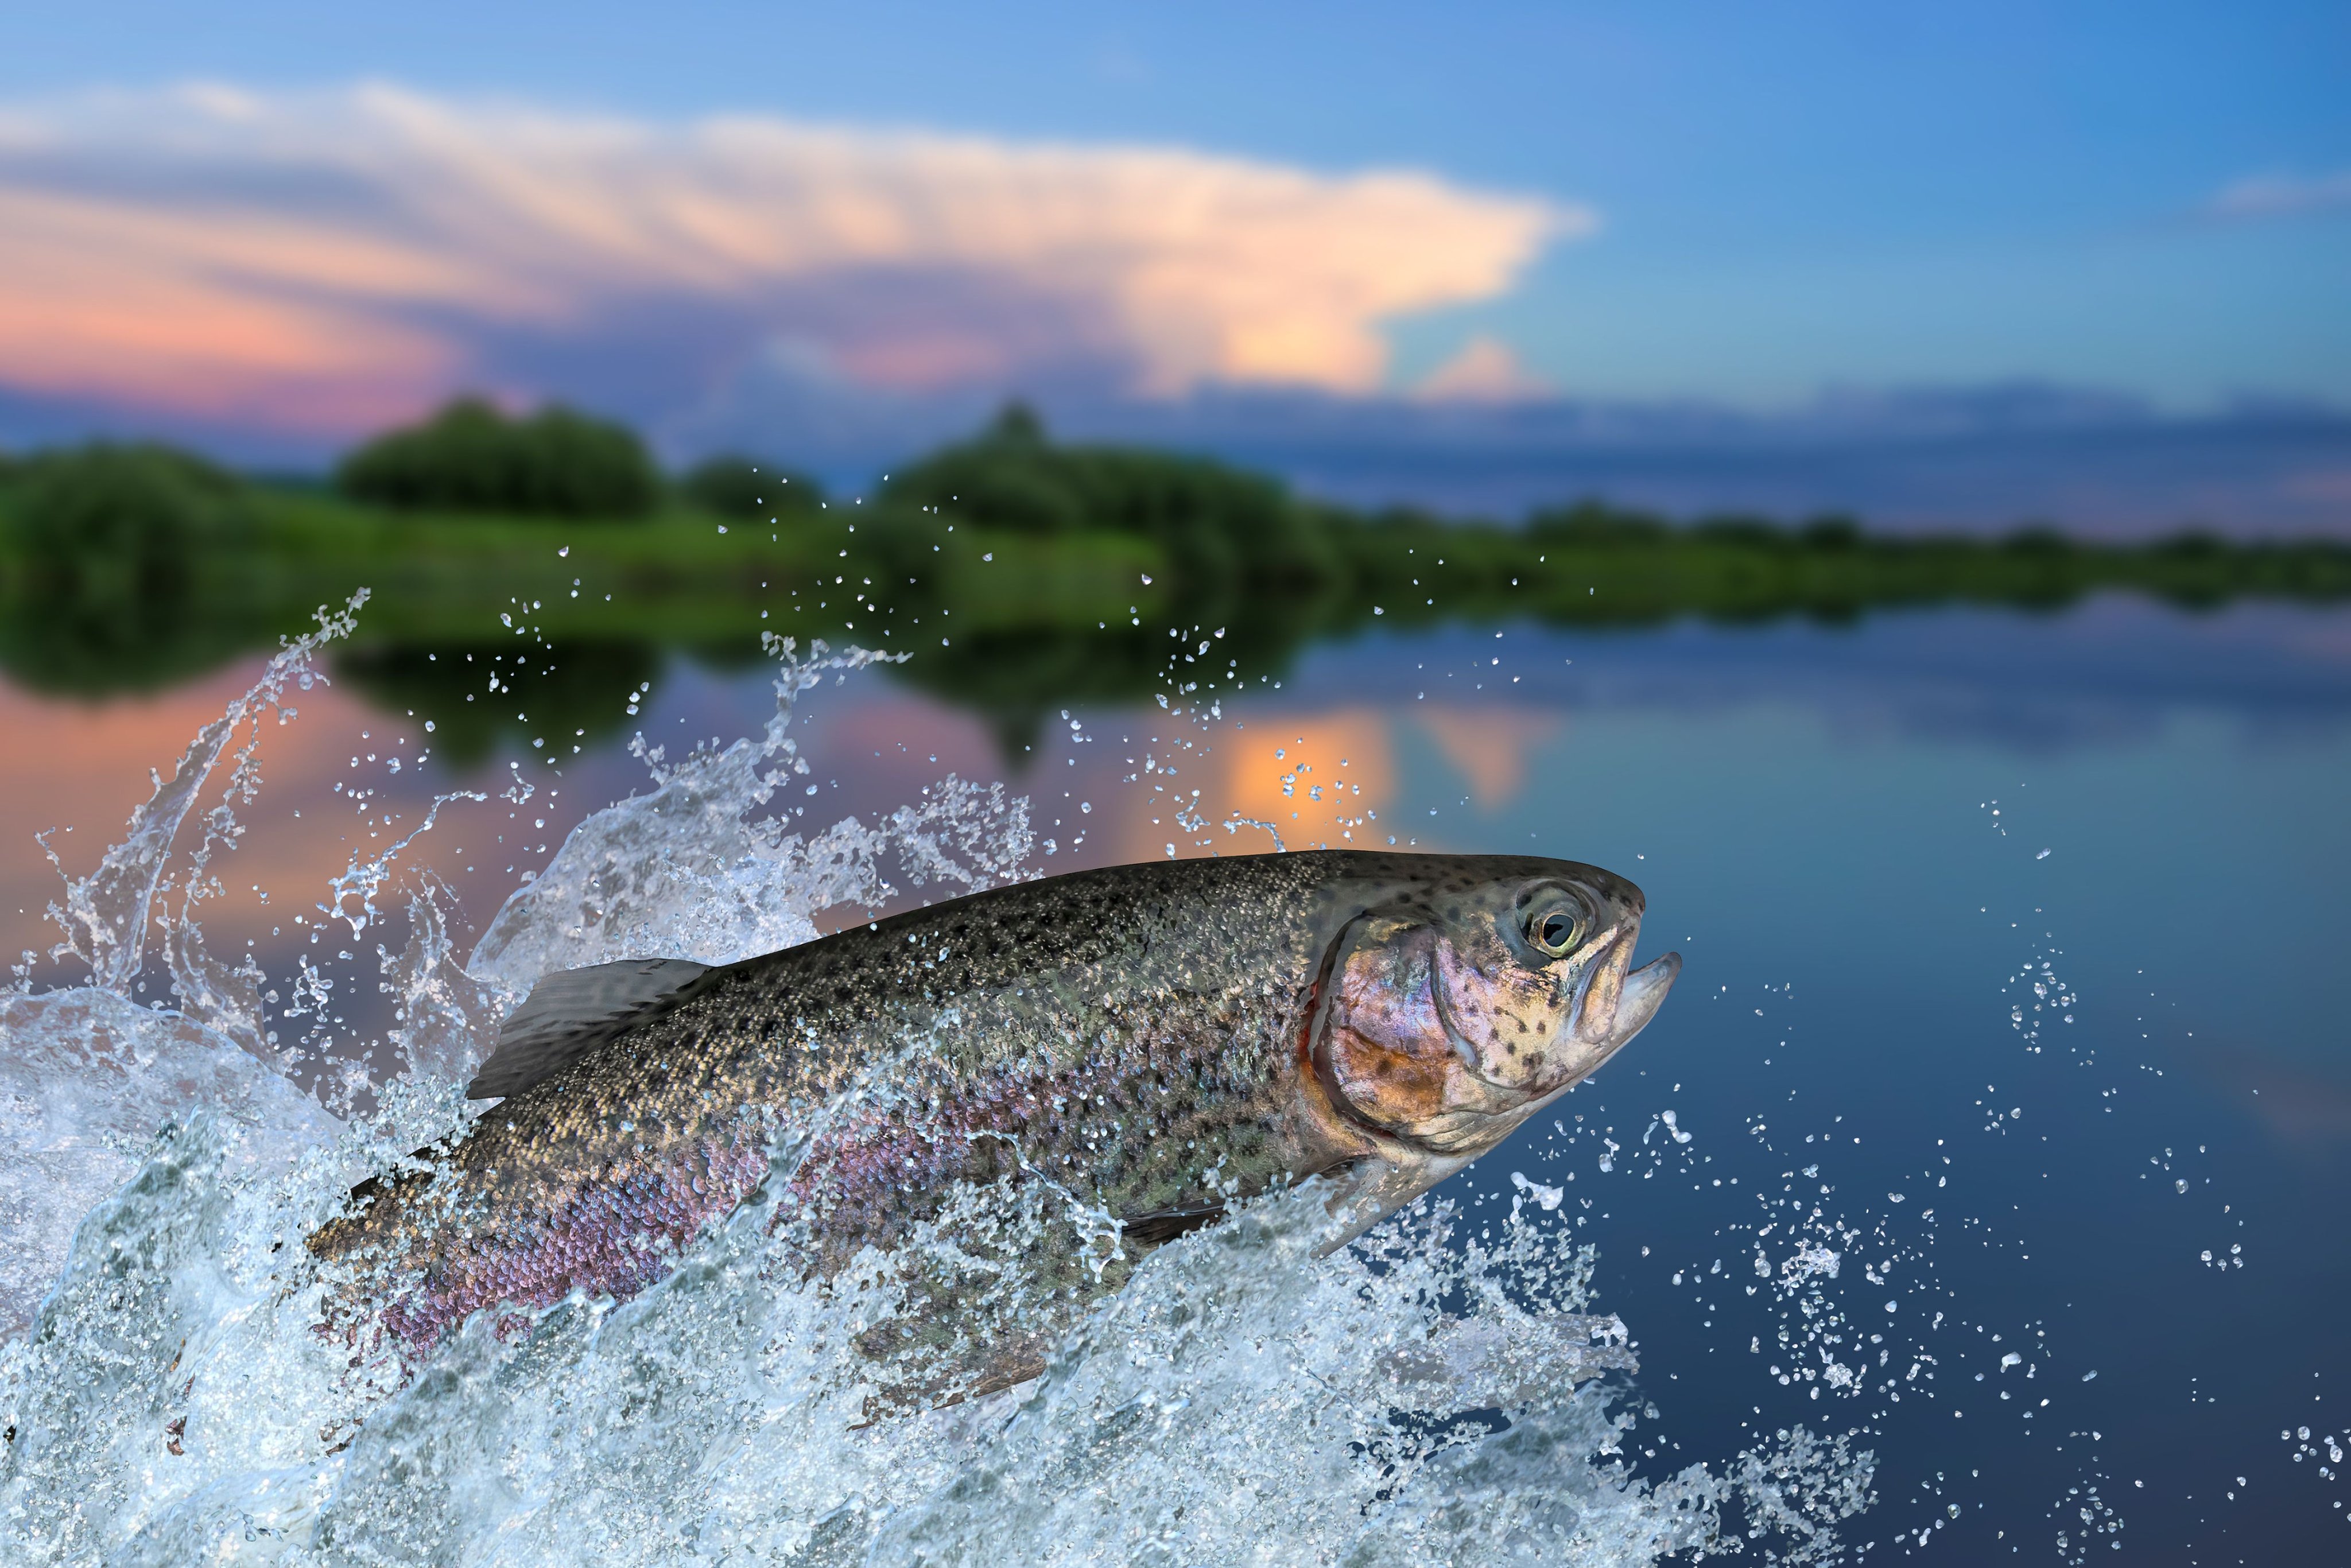 One-third of freshwater fish face extinction and other freshwater